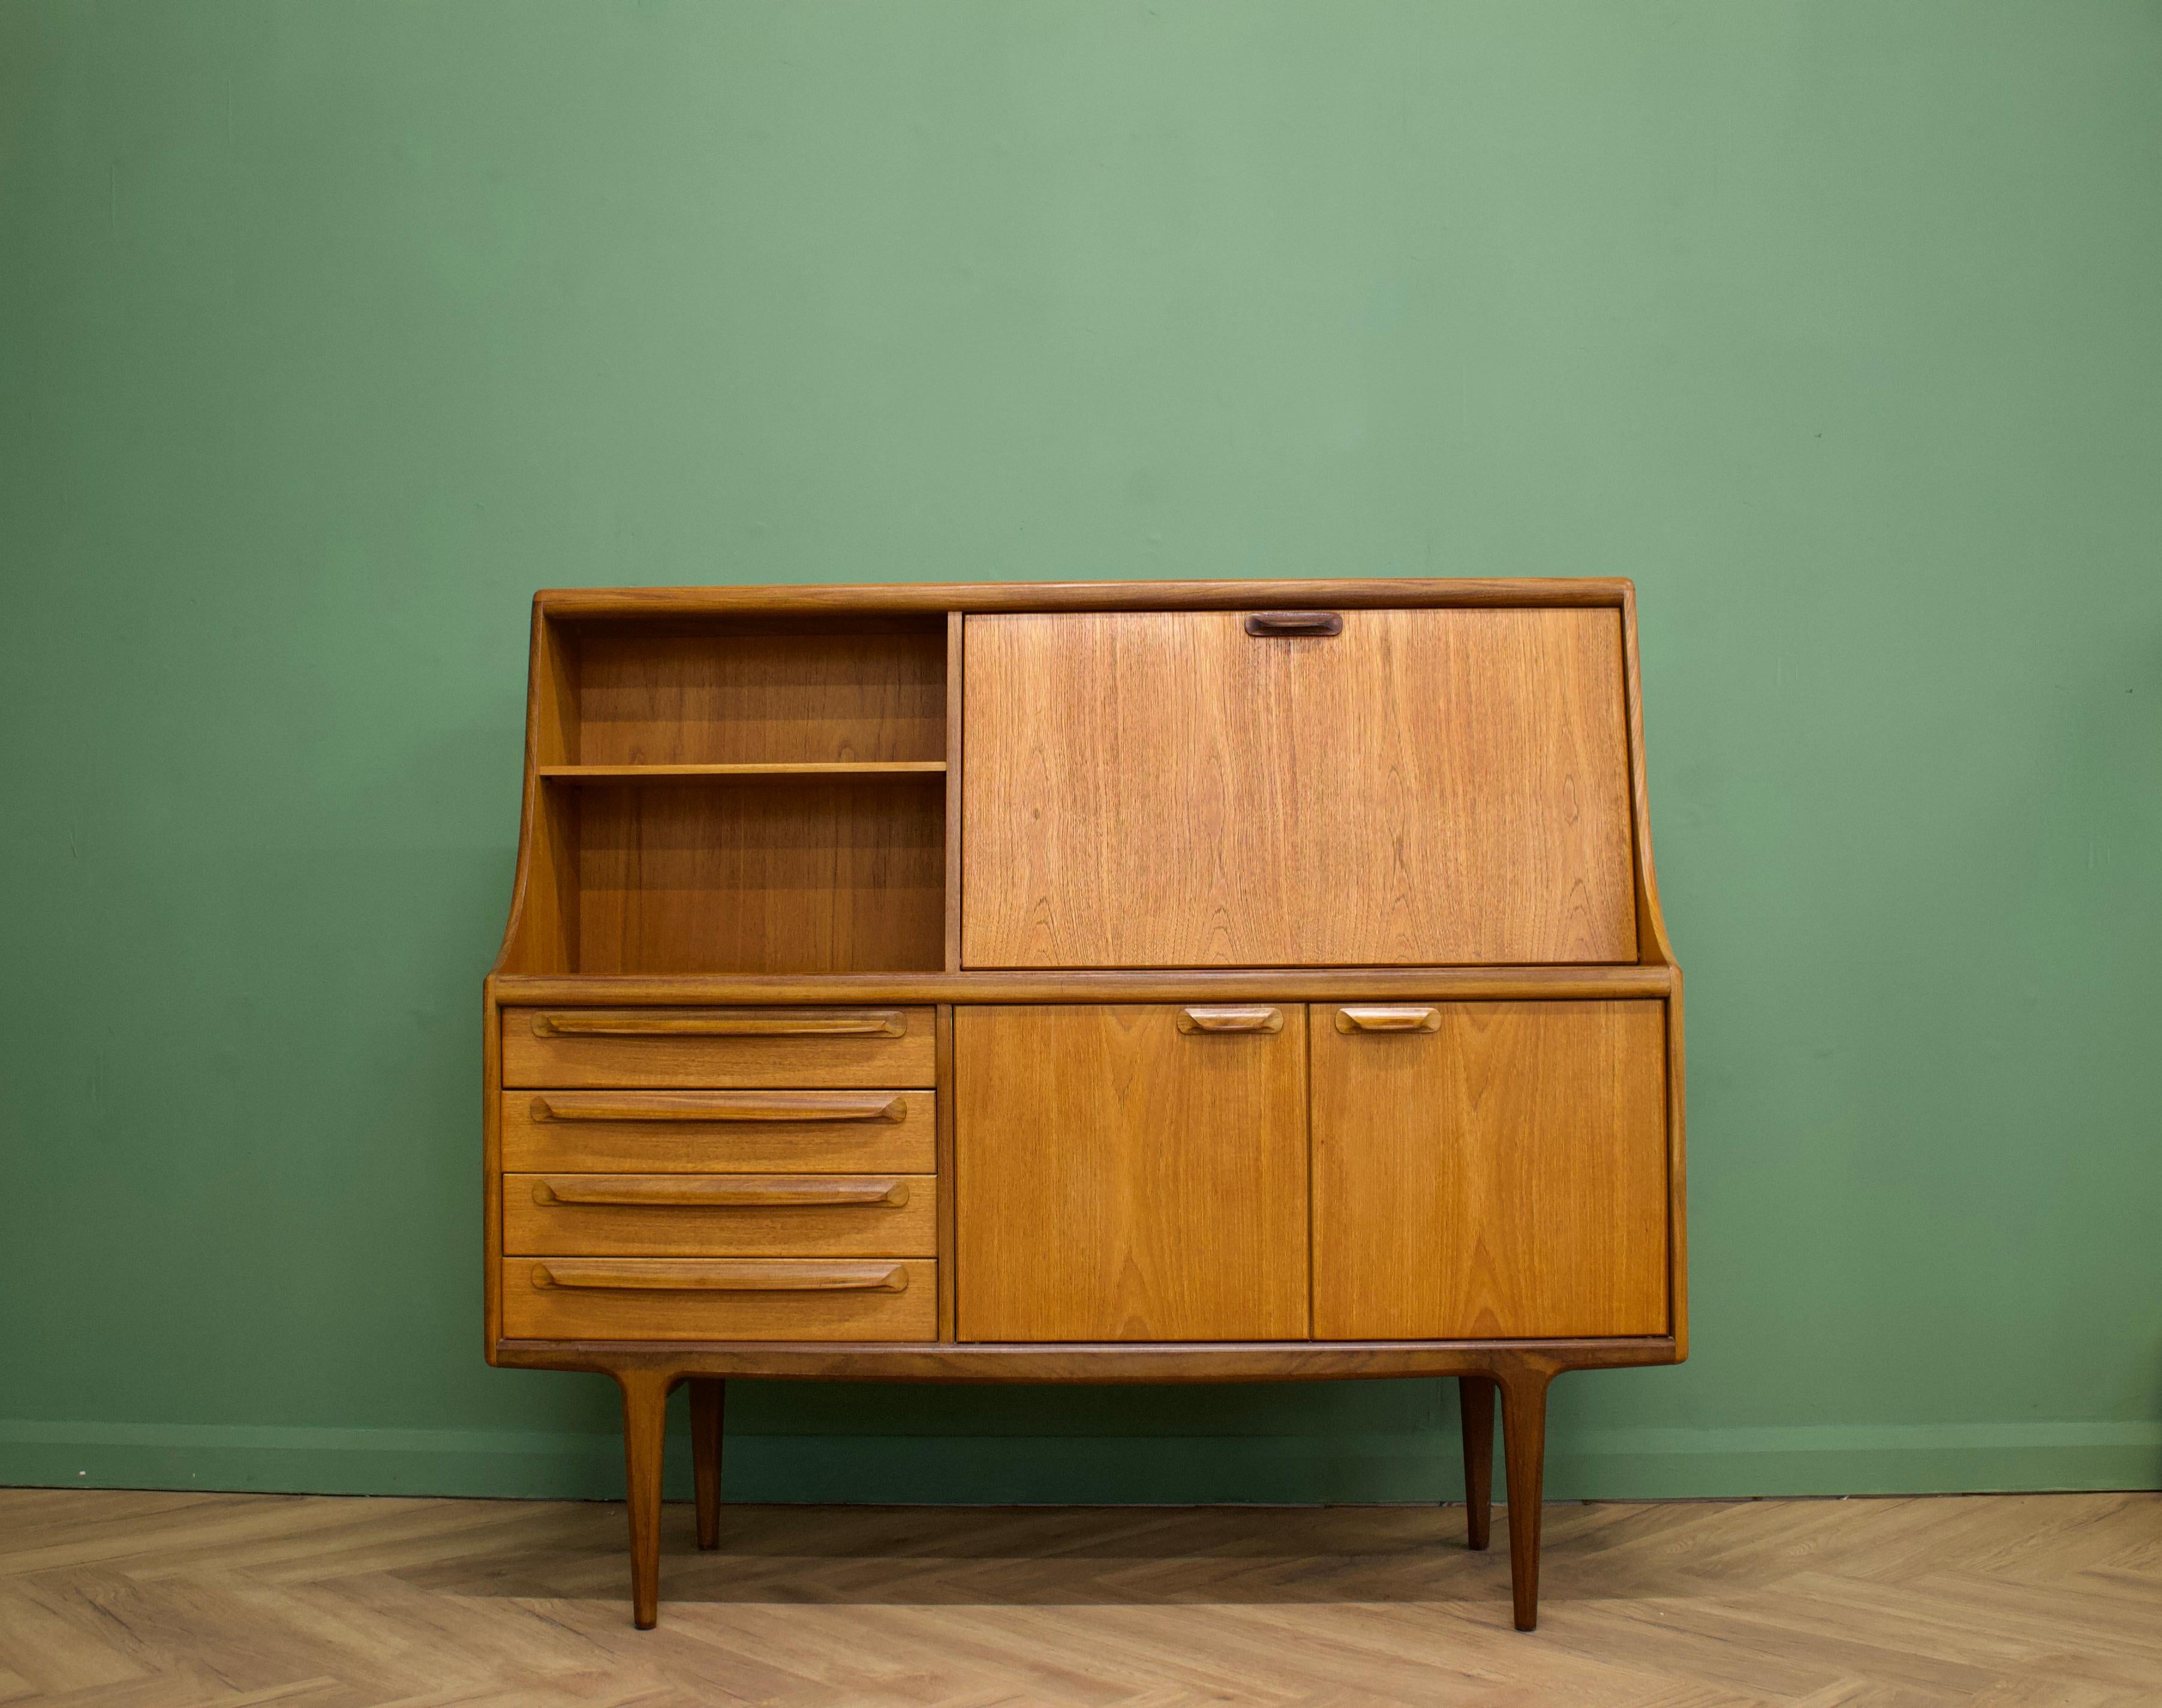 - Mid-Century Modern drinks cabinet / high sideboard.
- Manufactured in the UK by Younger.
- Made from teak and teak veneer.